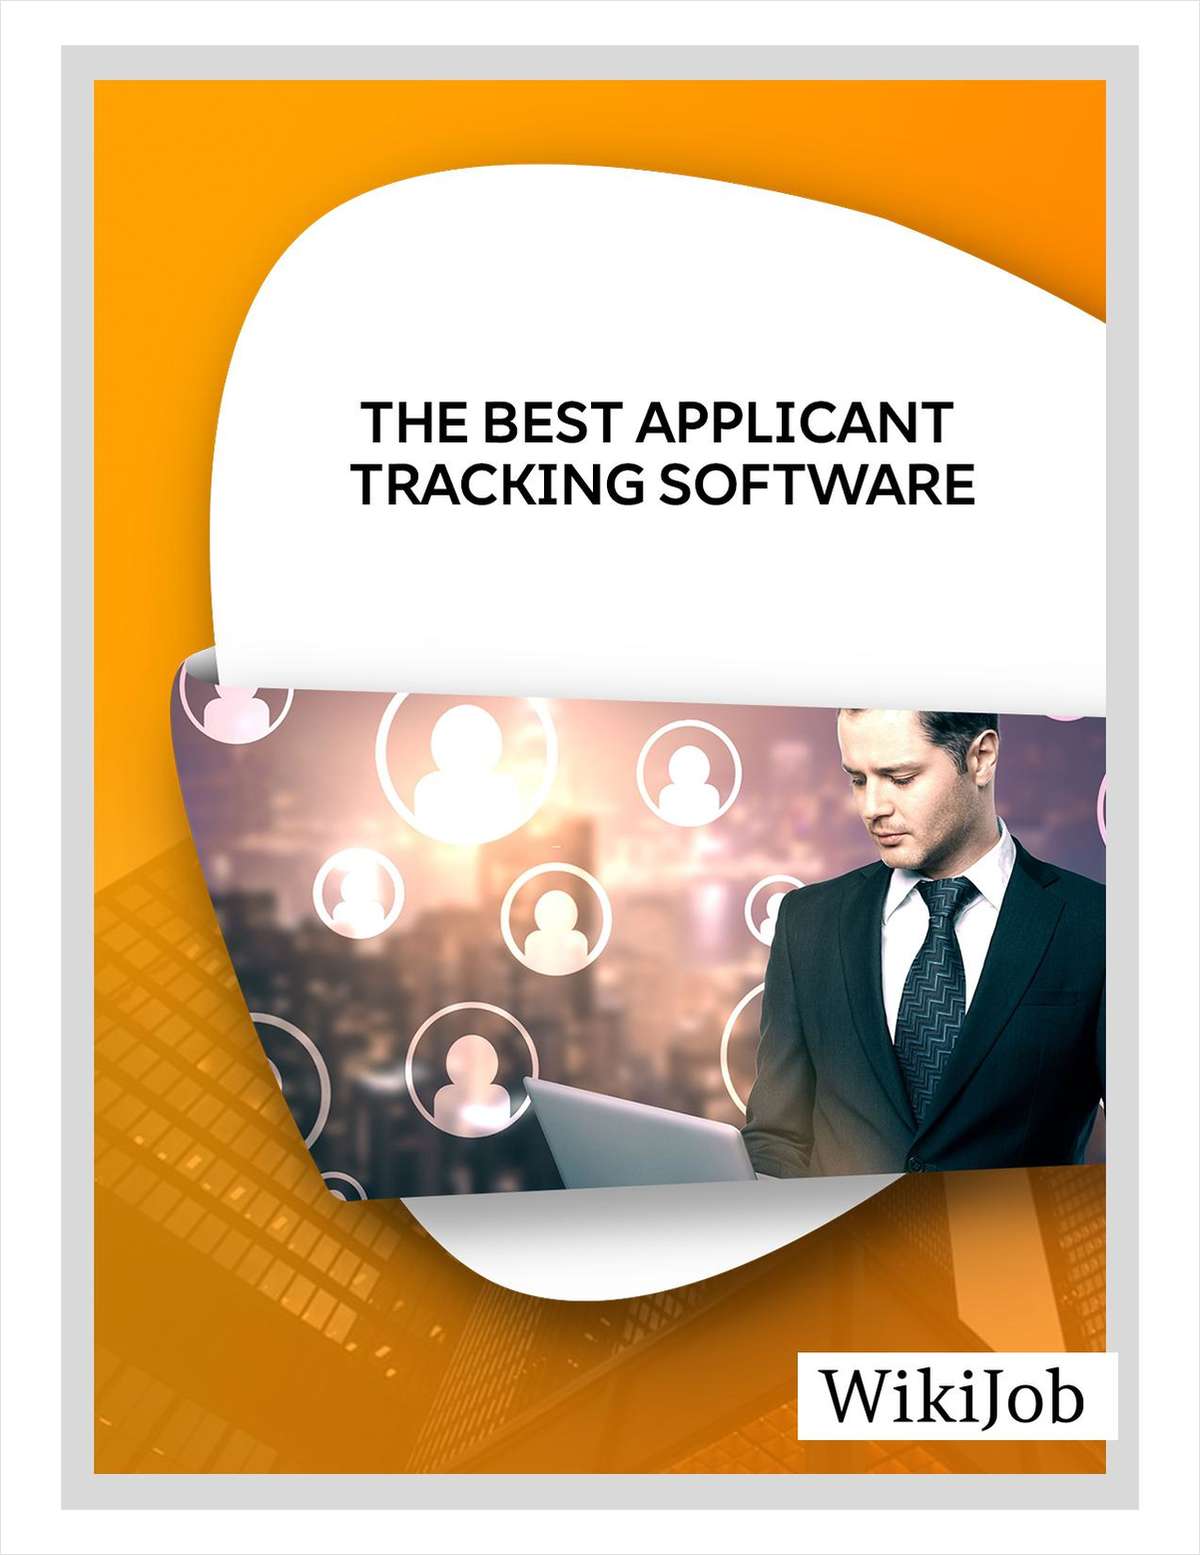 The Best Applicant Tracking Software